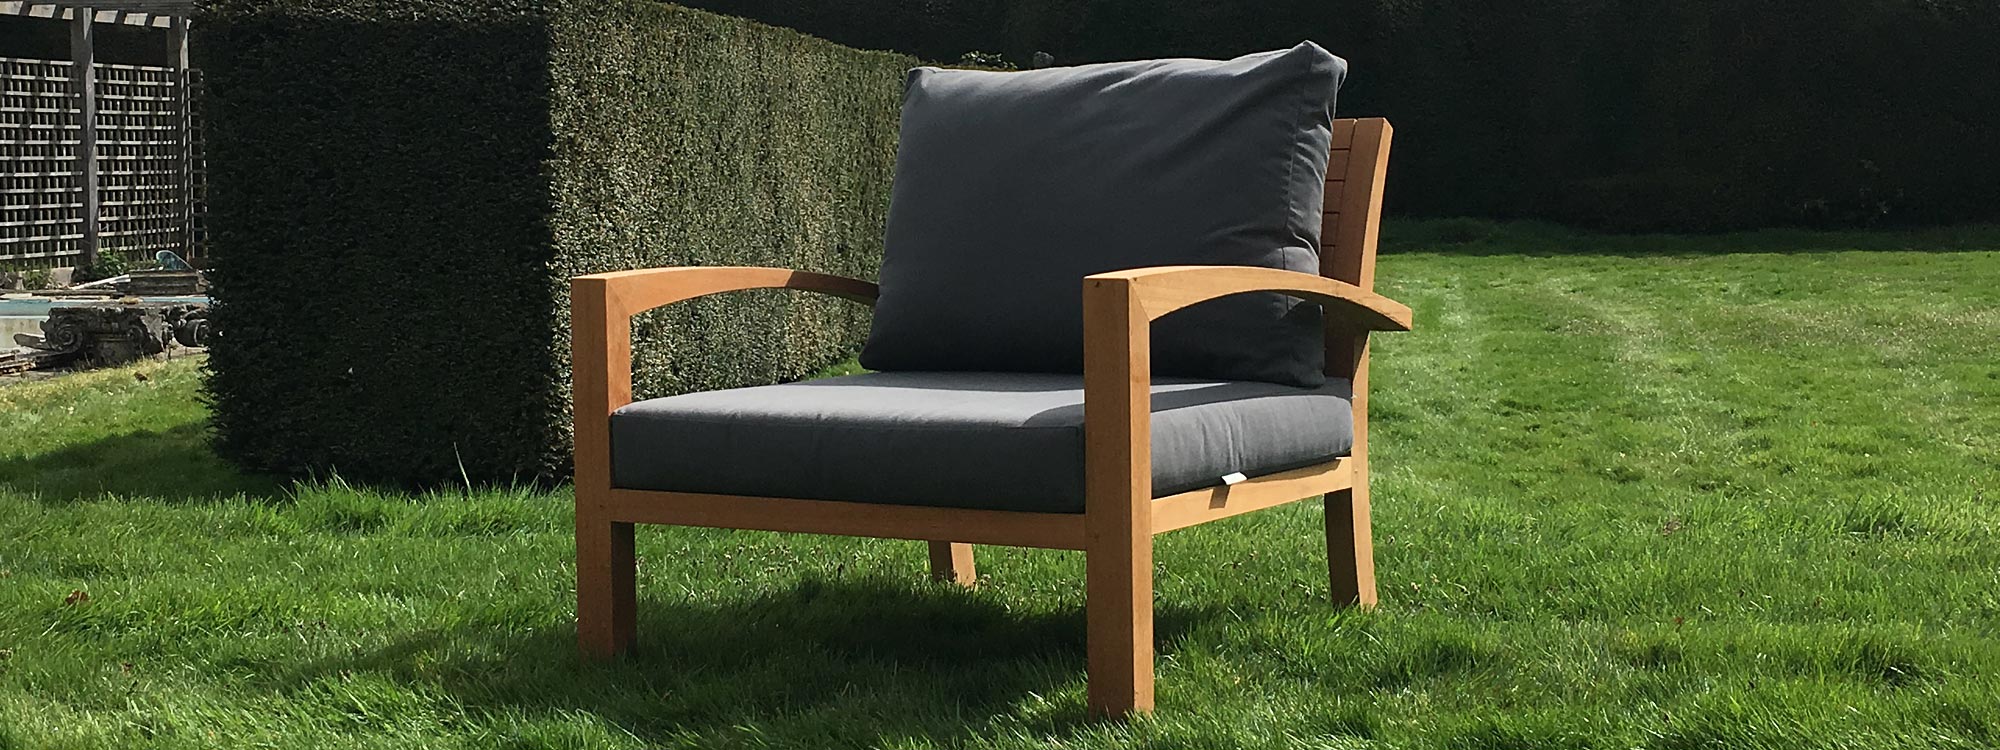 Image of IXIT teak relax armchair with grey back & seat cushions on verdant green lawn with yew hedge in background